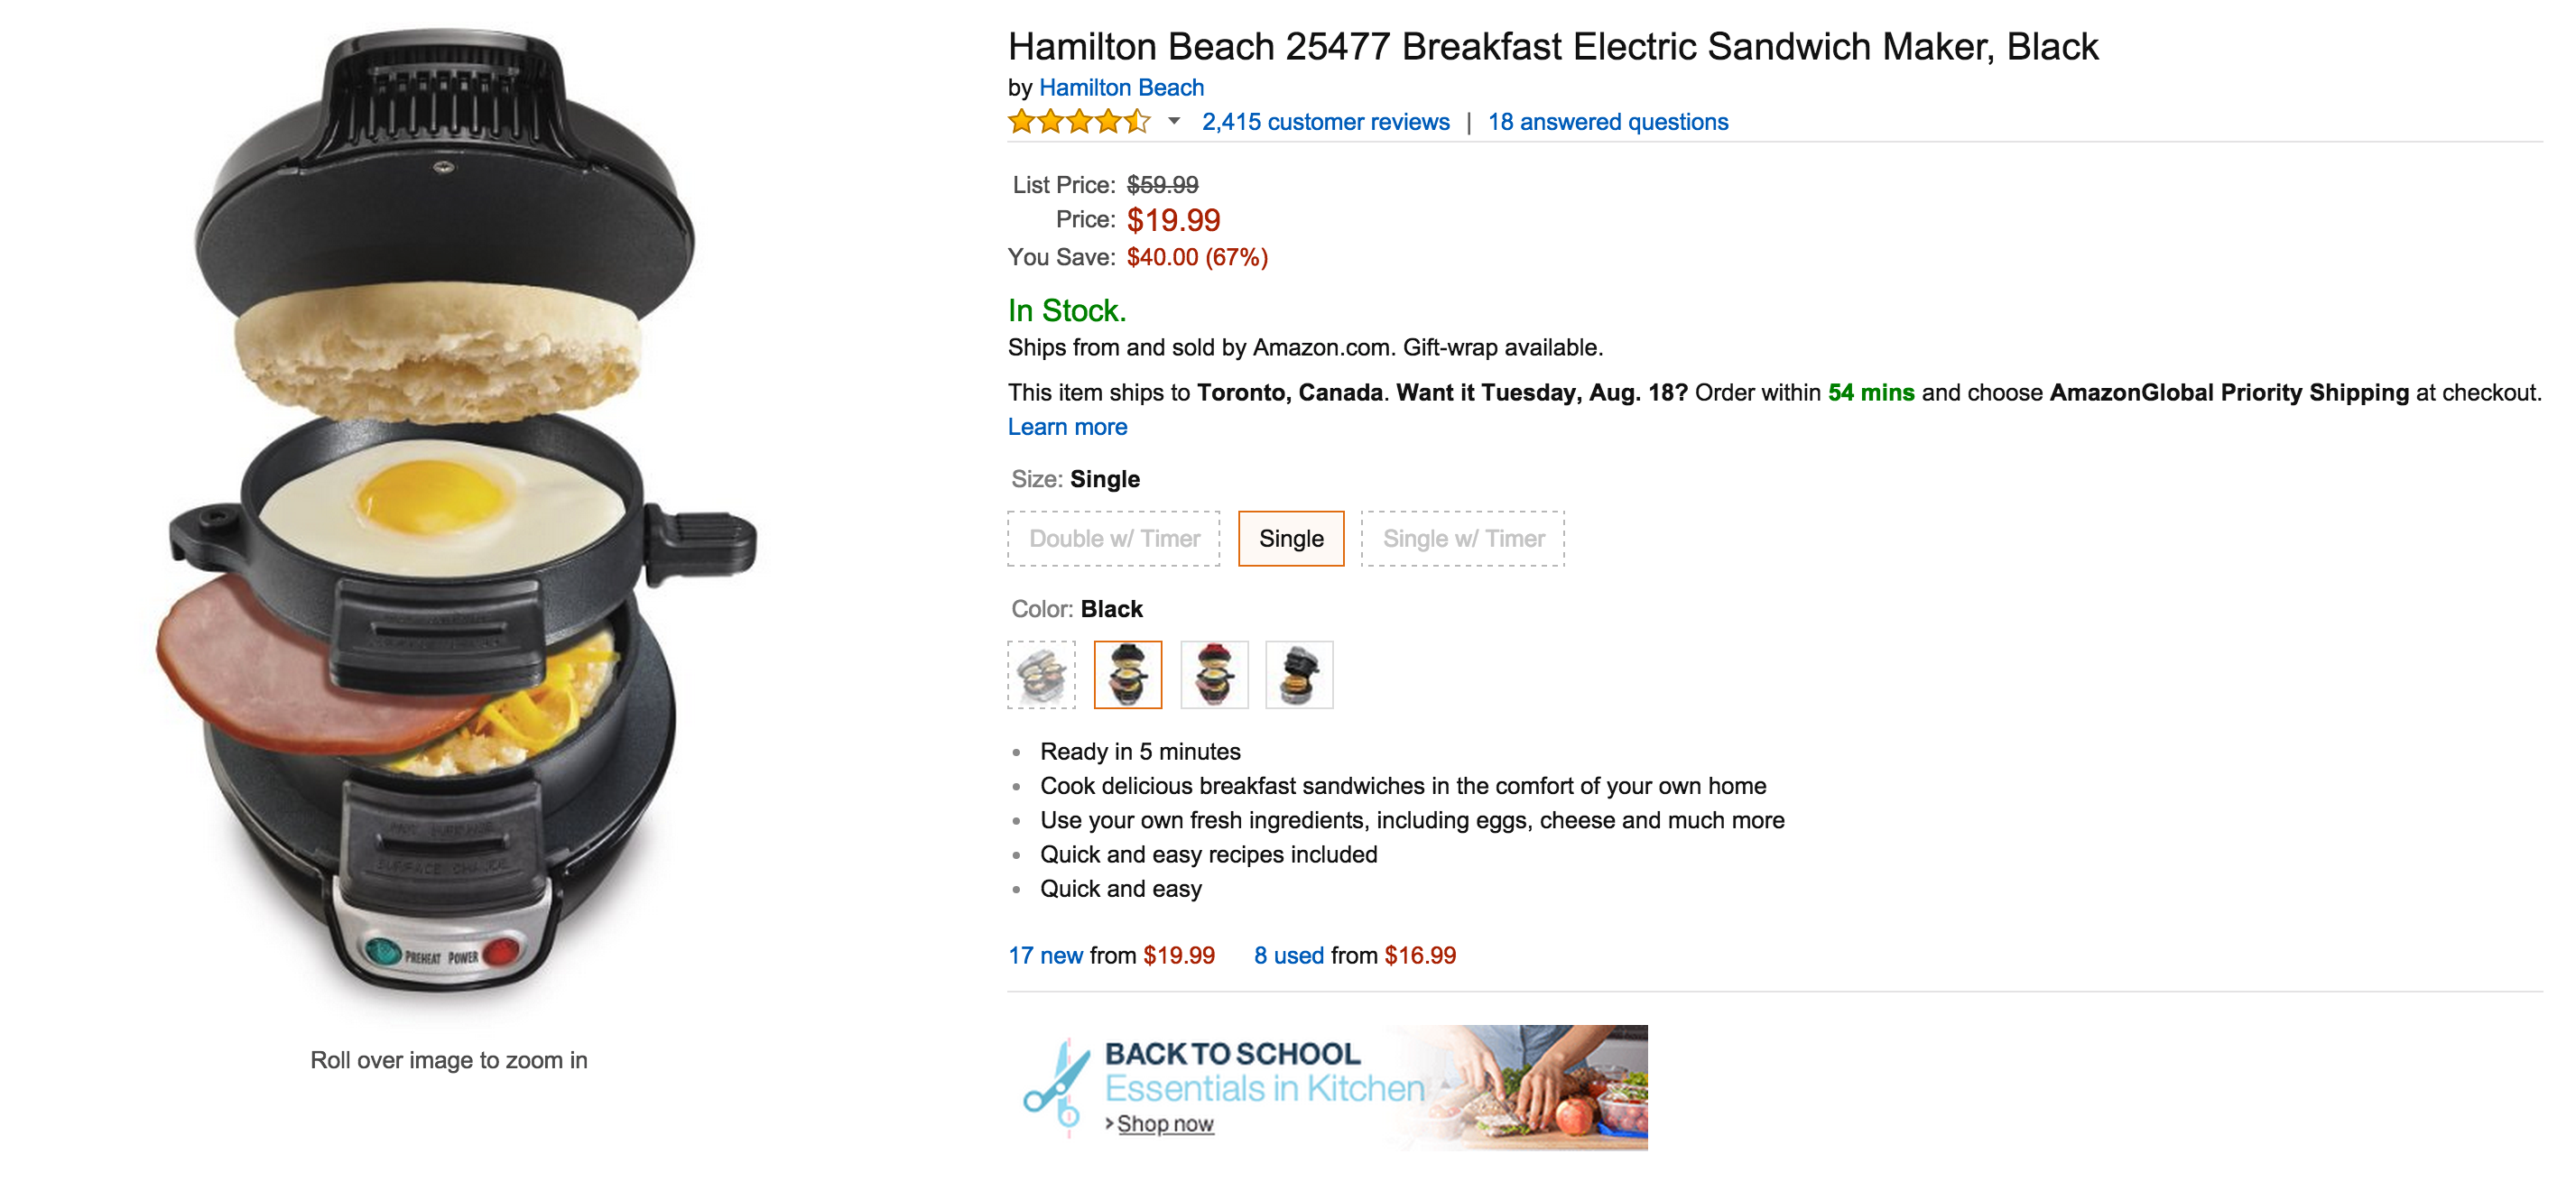 https://9to5toys.com/wp-content/uploads/sites/5/2015/08/hamilton-beach-breakfast-electric-sandwich-maker-in-black-25477-sale-02.png